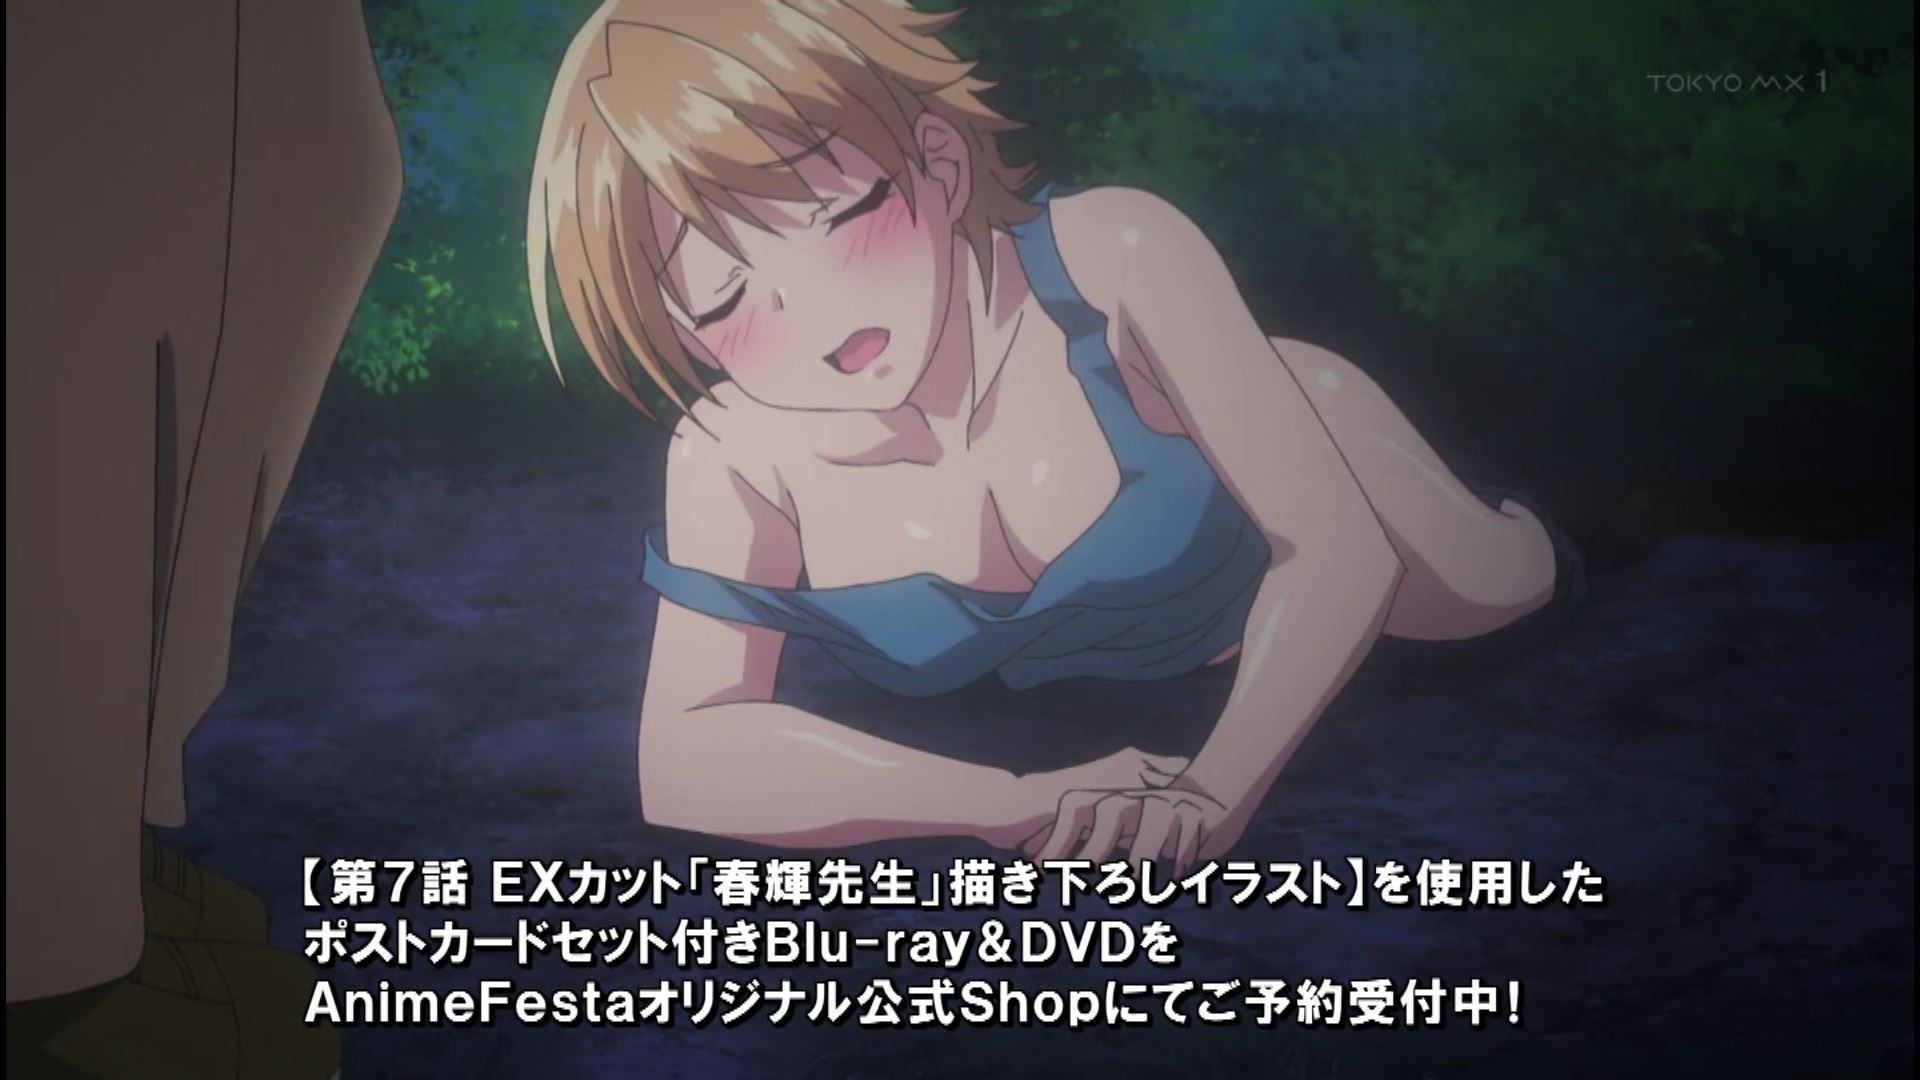 outdoors in episode 7 of the anime "Harem Kyampu!" And go straight to the ecchi scene! 18